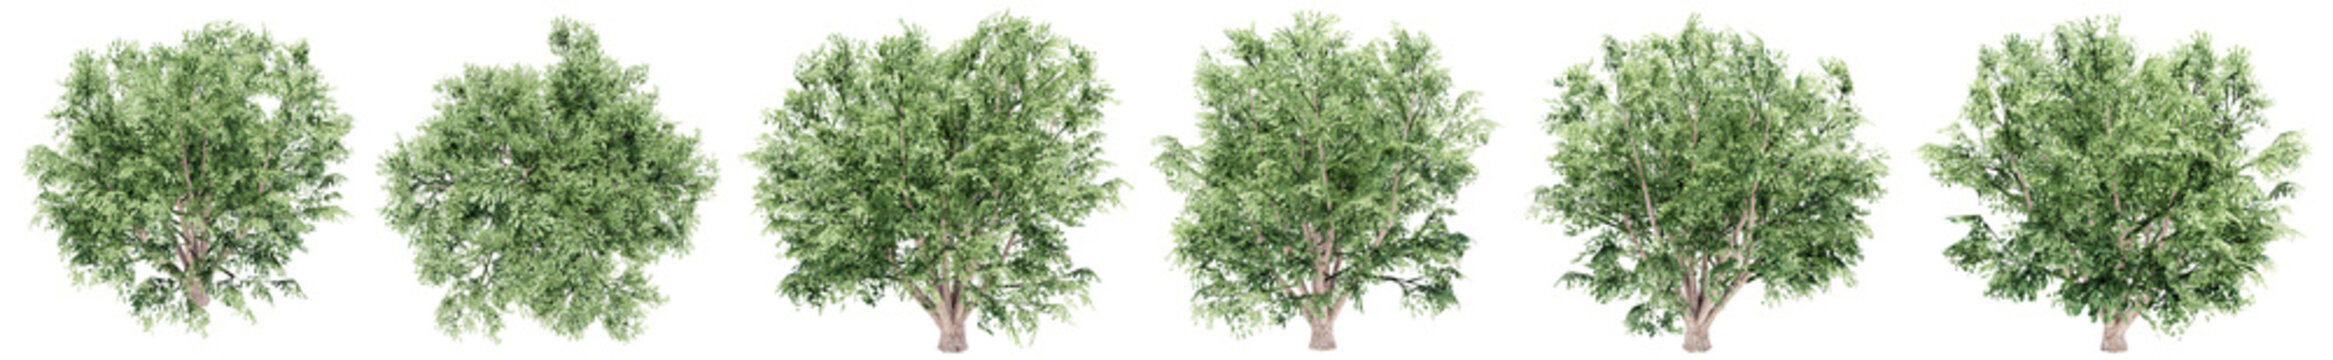 Set or collection of green field elm trees isolated on white background. Concept or conceptual 3d illustration for nature, ecology and conservation, strength and endurance, force and life